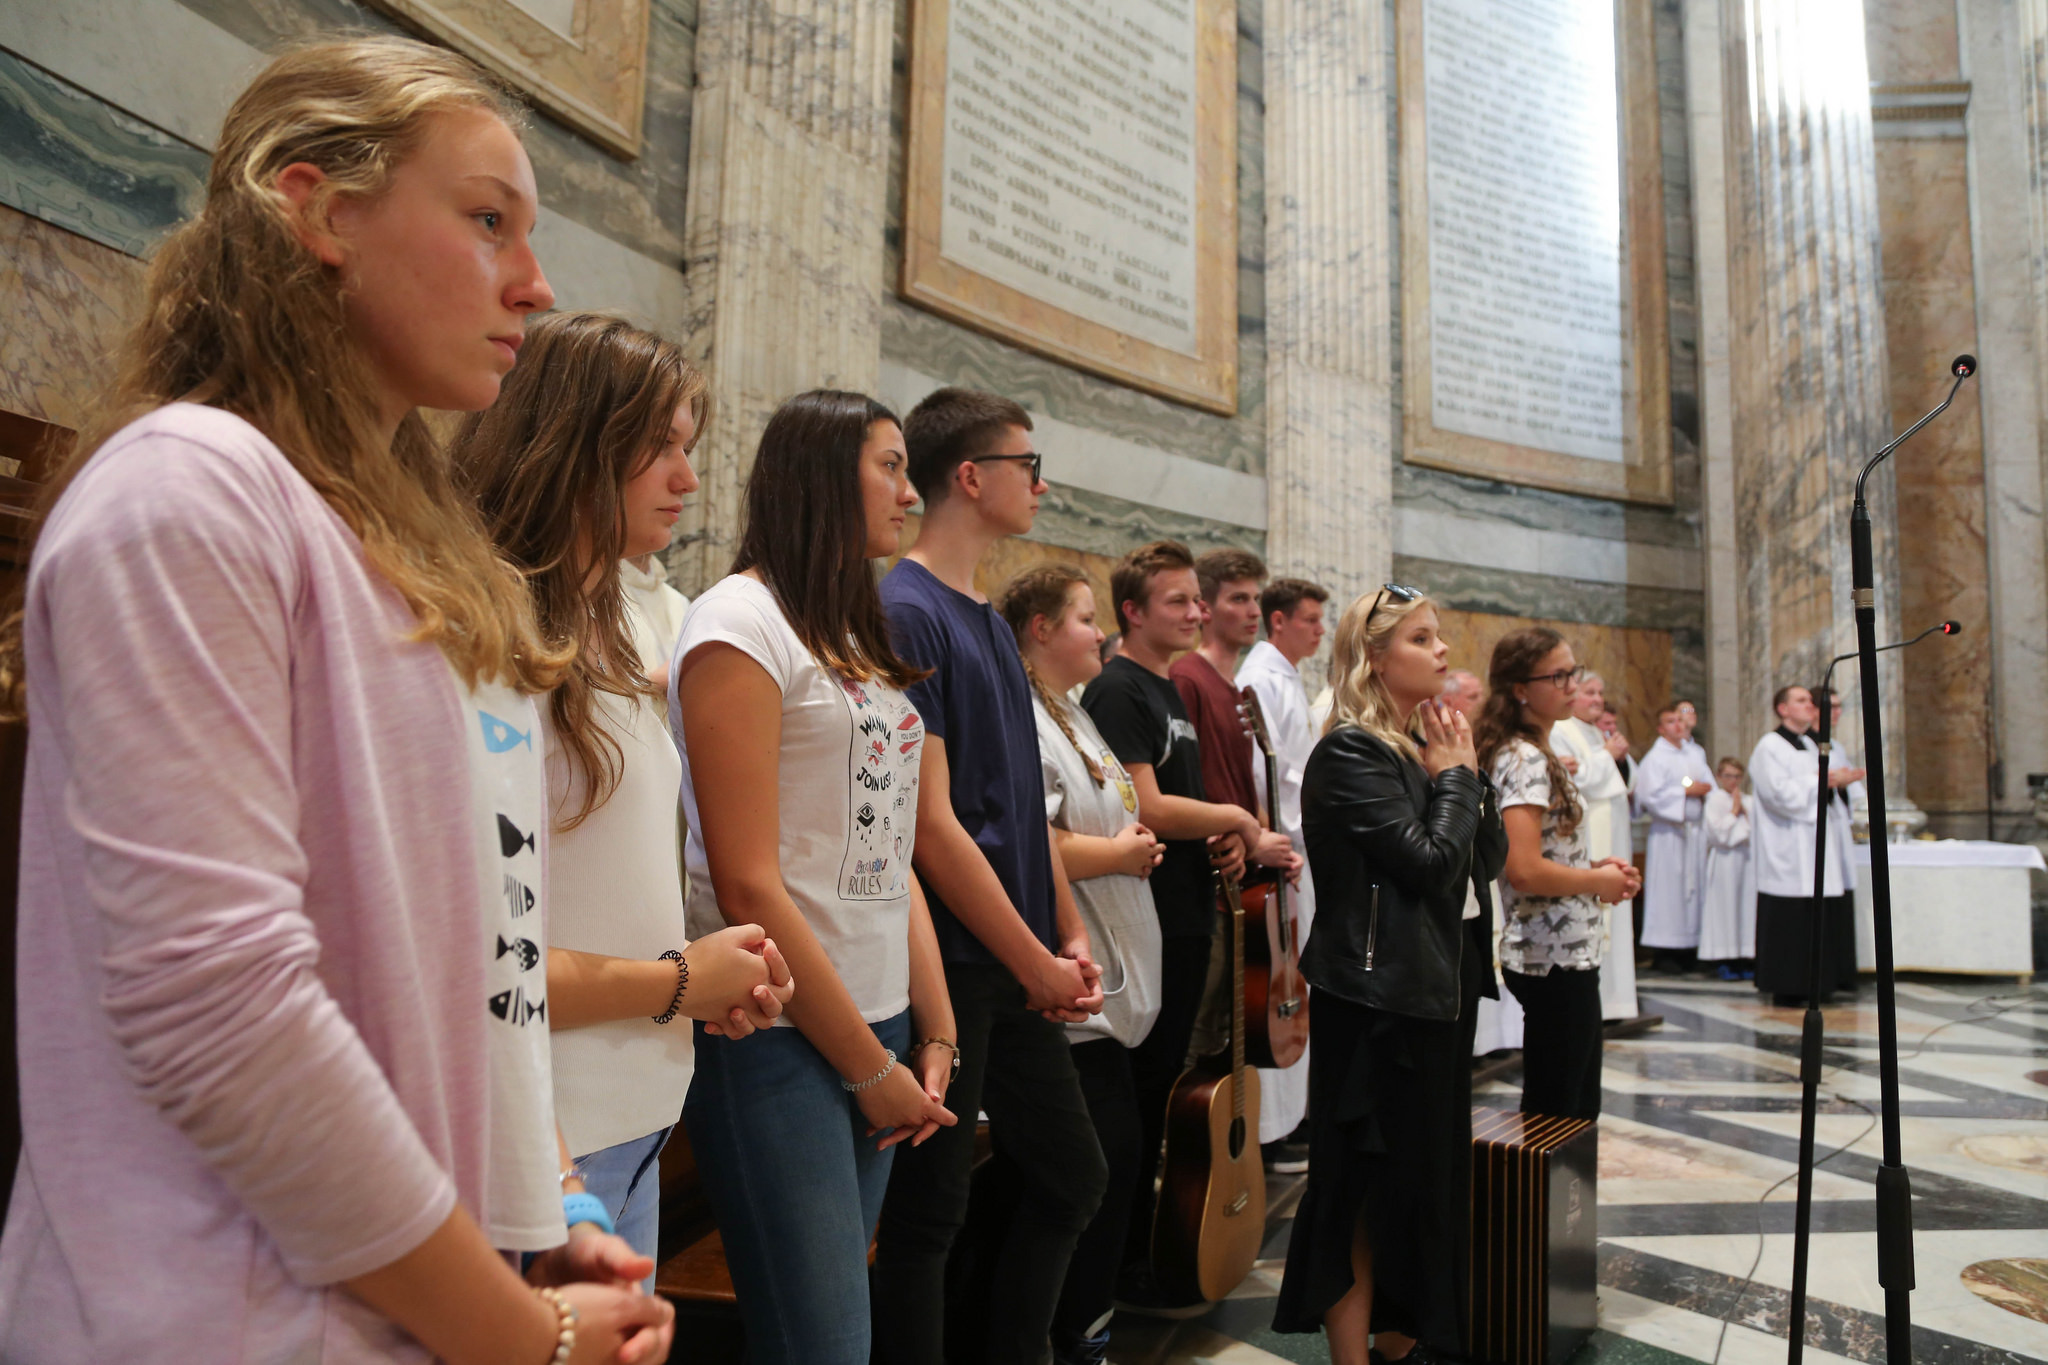 Is the Church still relevant to young people? 